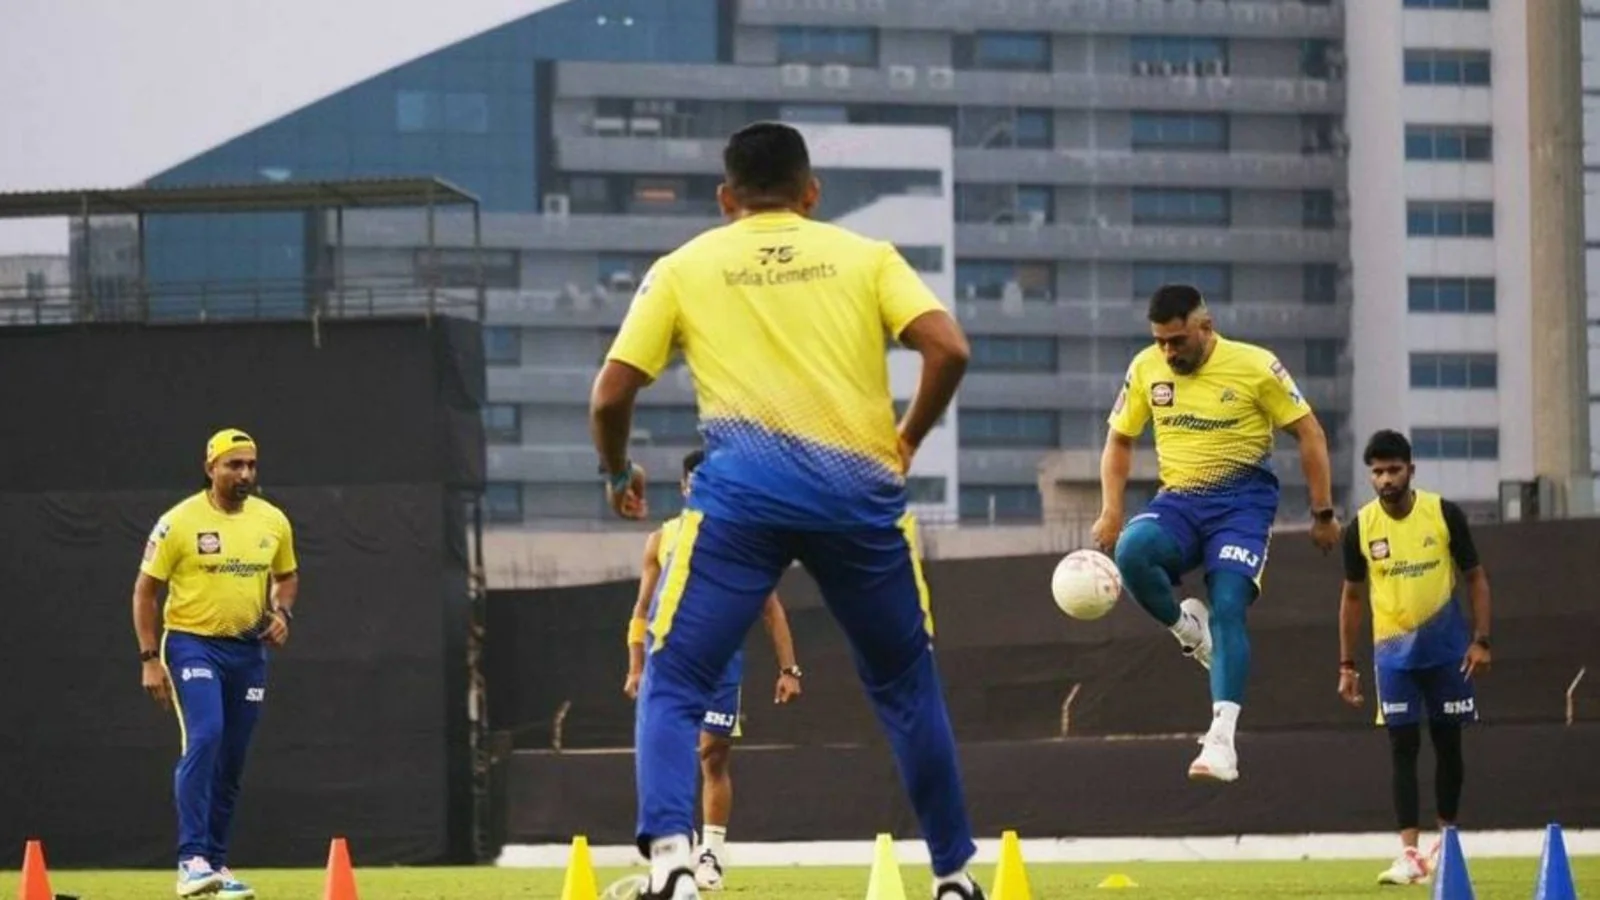 ‘He has been told to improve his football skills’: MS Dhoni takes cheeky dig at CSK’s new recruit